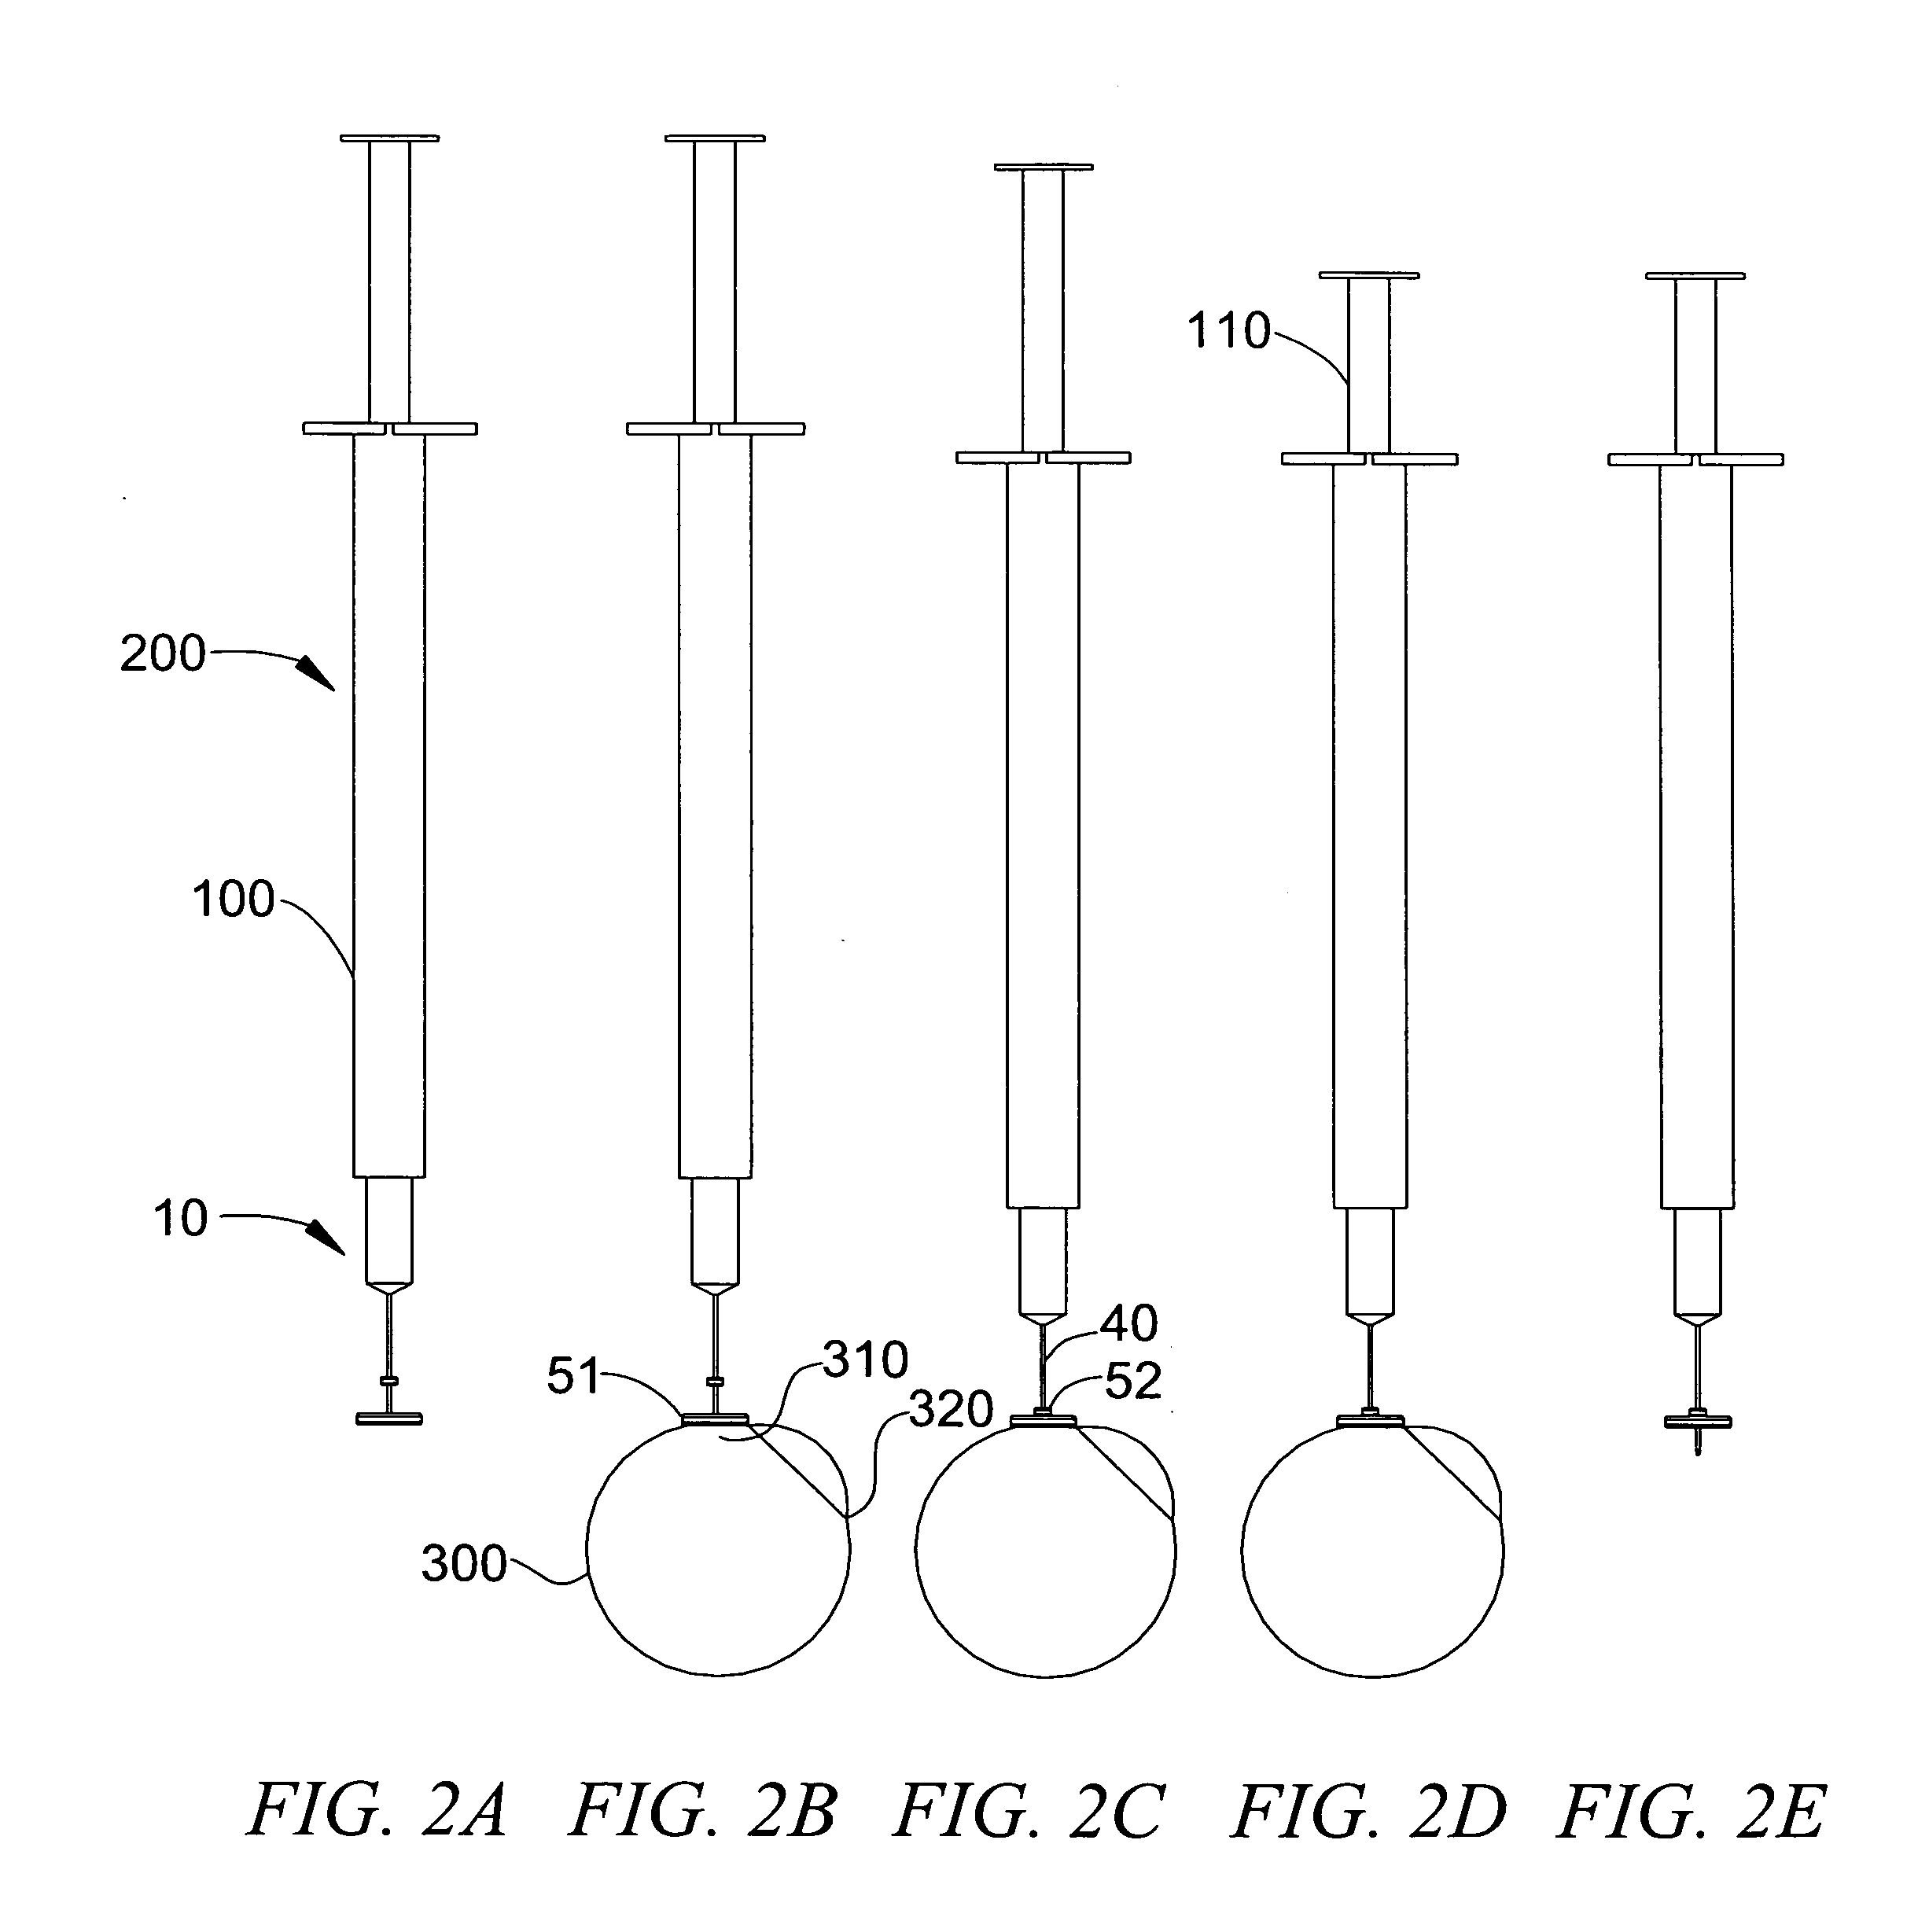 Intravitreal injection device and system